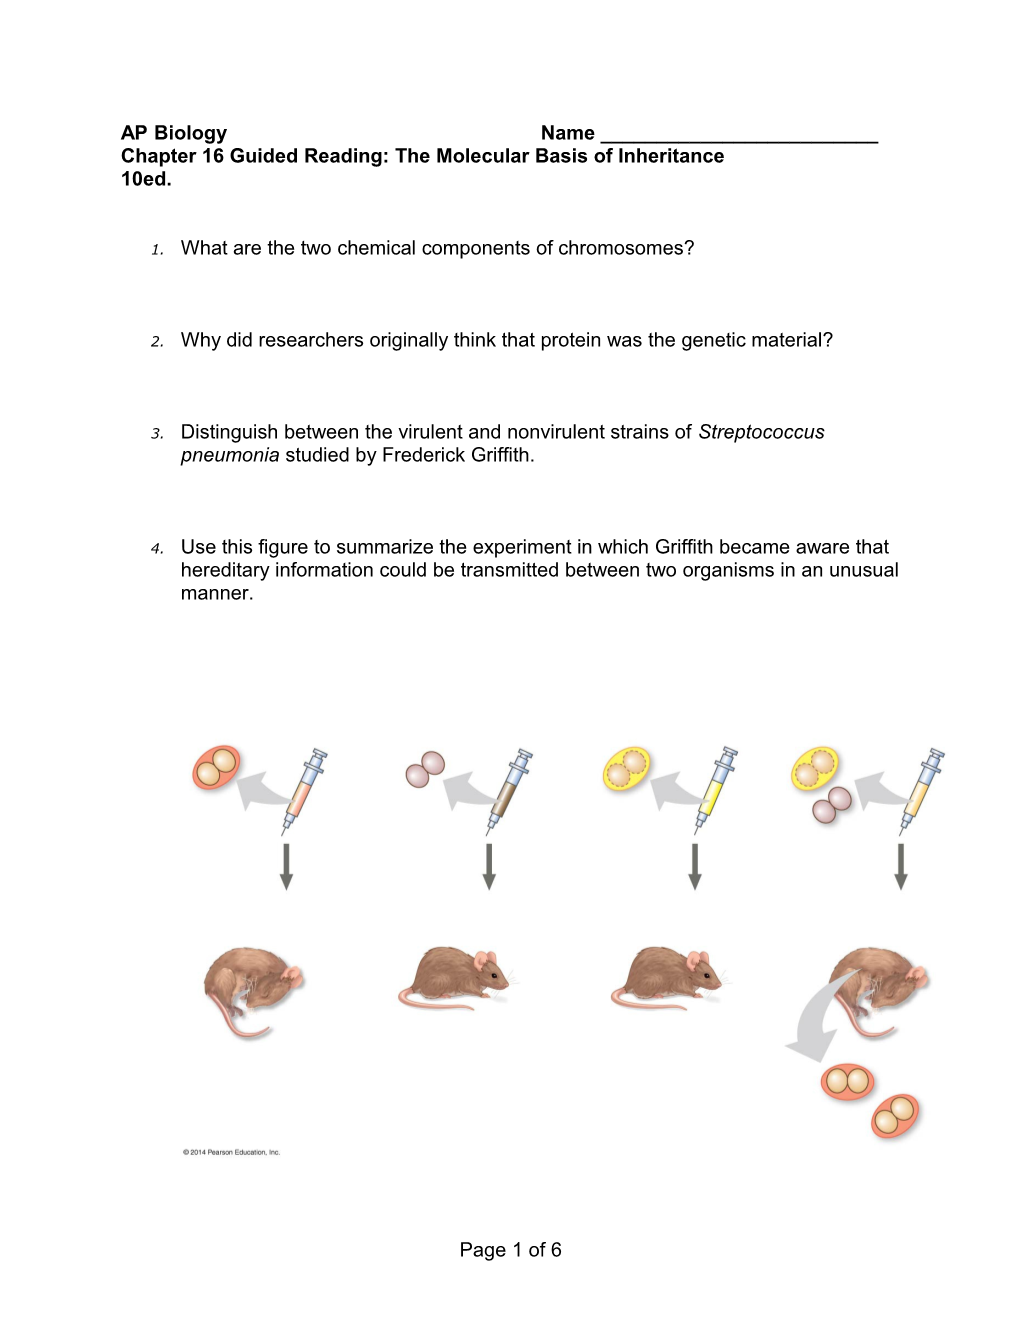 Chapter 16 Guided Reading: the Molecular Basis of Inheritance